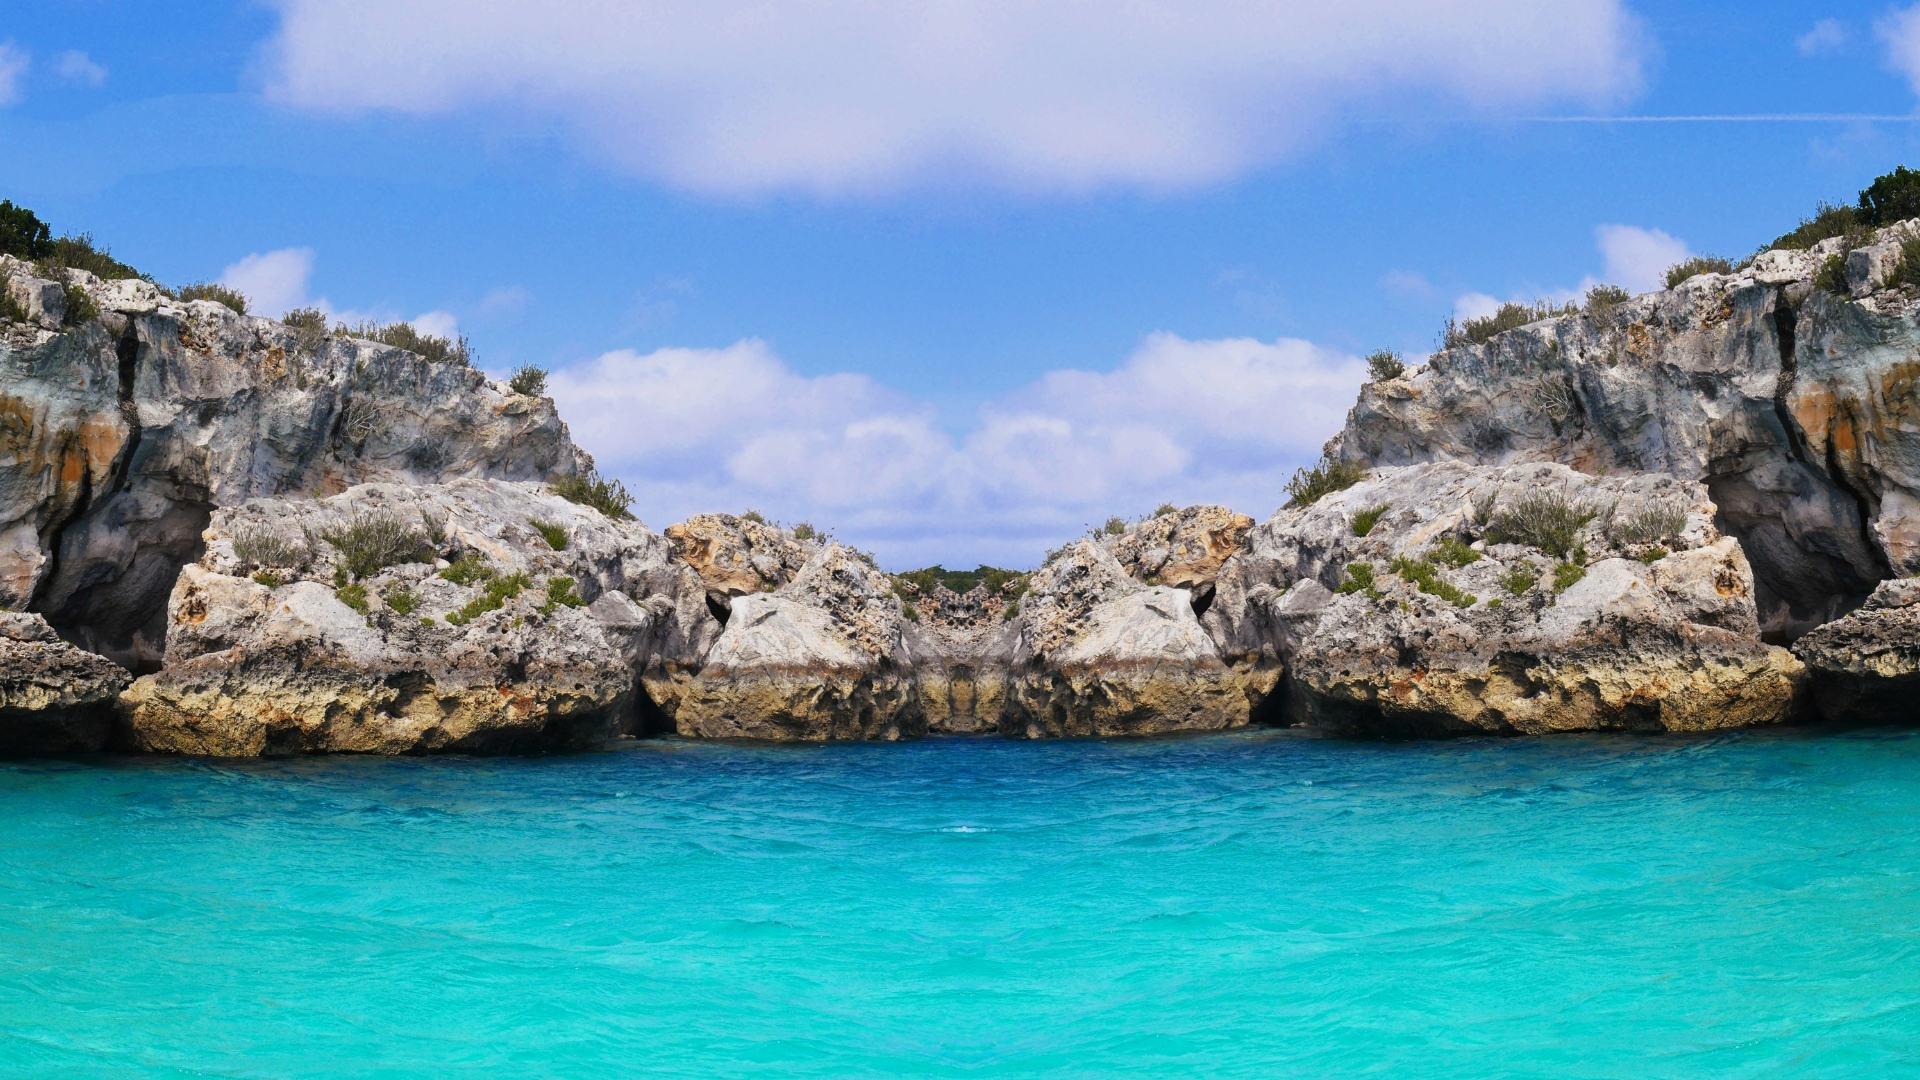 Thunderball Grotto Best anchorages for luxury yacht charters in the Bahamas